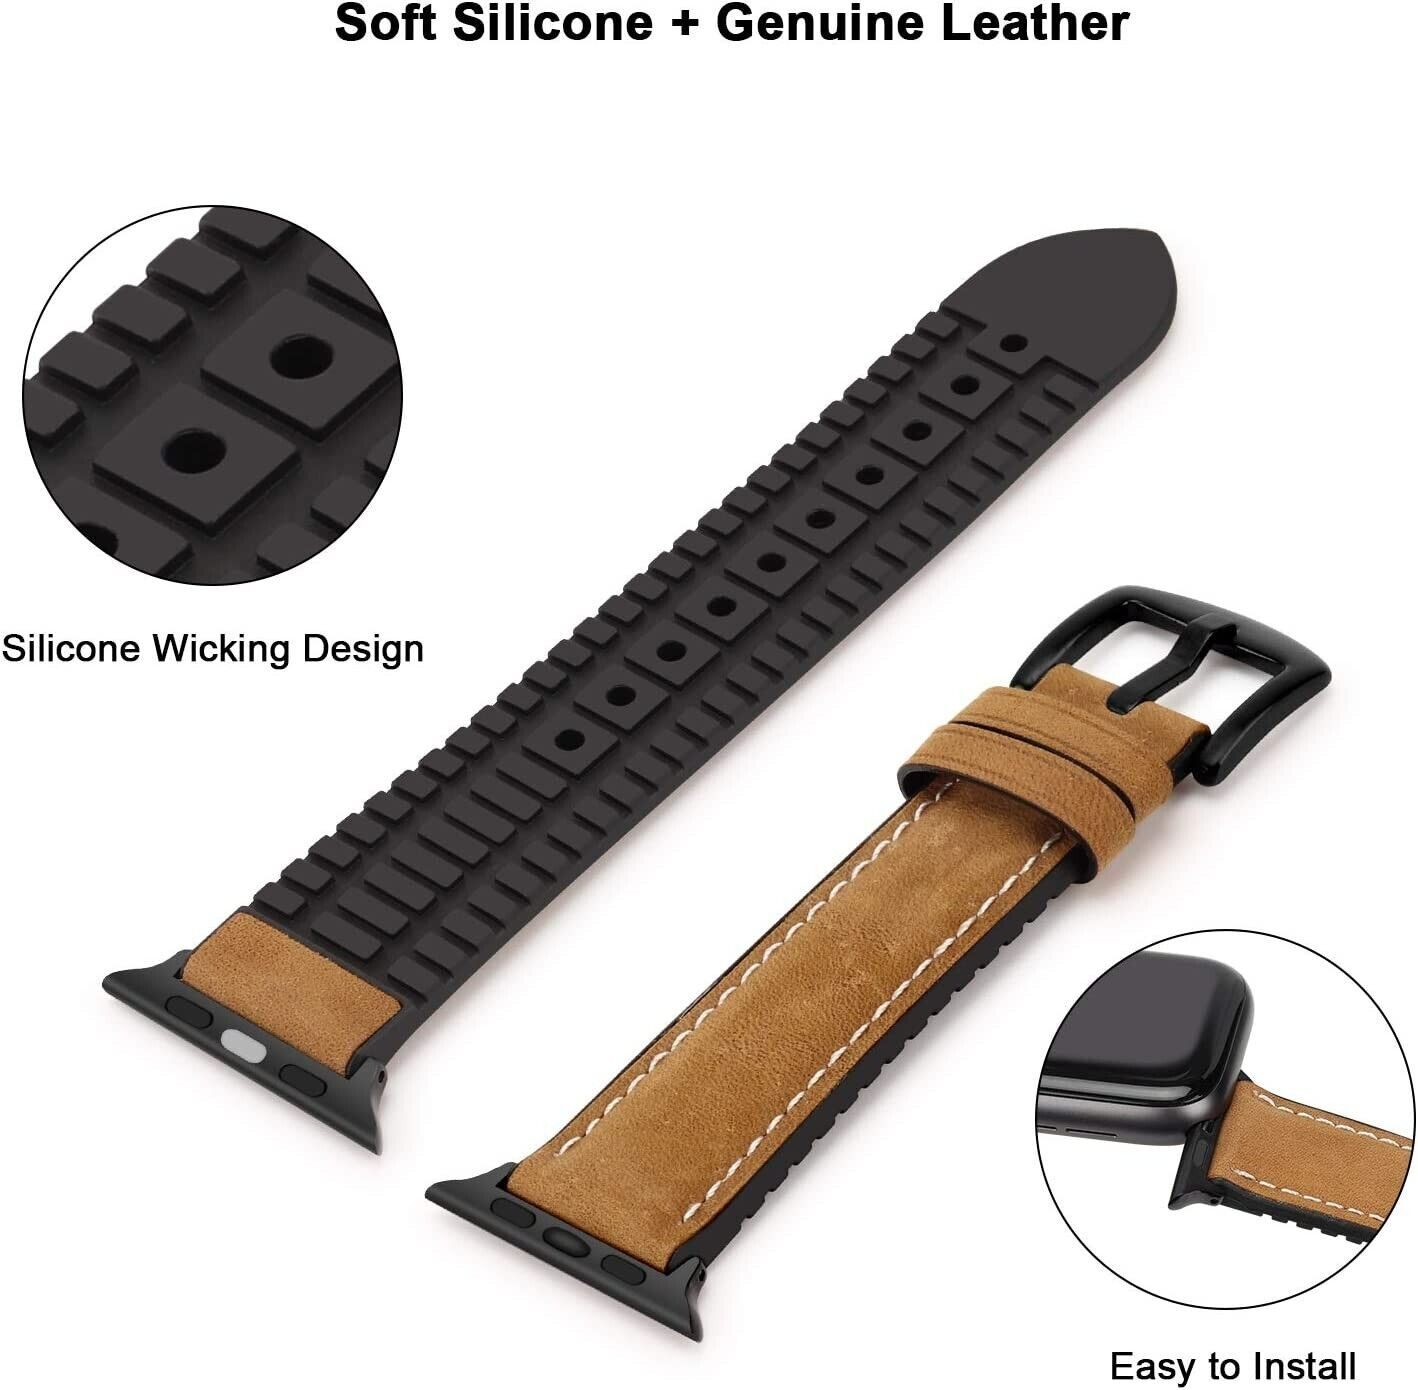 Bisikor Compatible with Apple Watch Strap 38mm 40mm, Genuine Leather and Soft Silicone Hybrid Sports Replacement Straps Compatible with Apple Watch - Brown